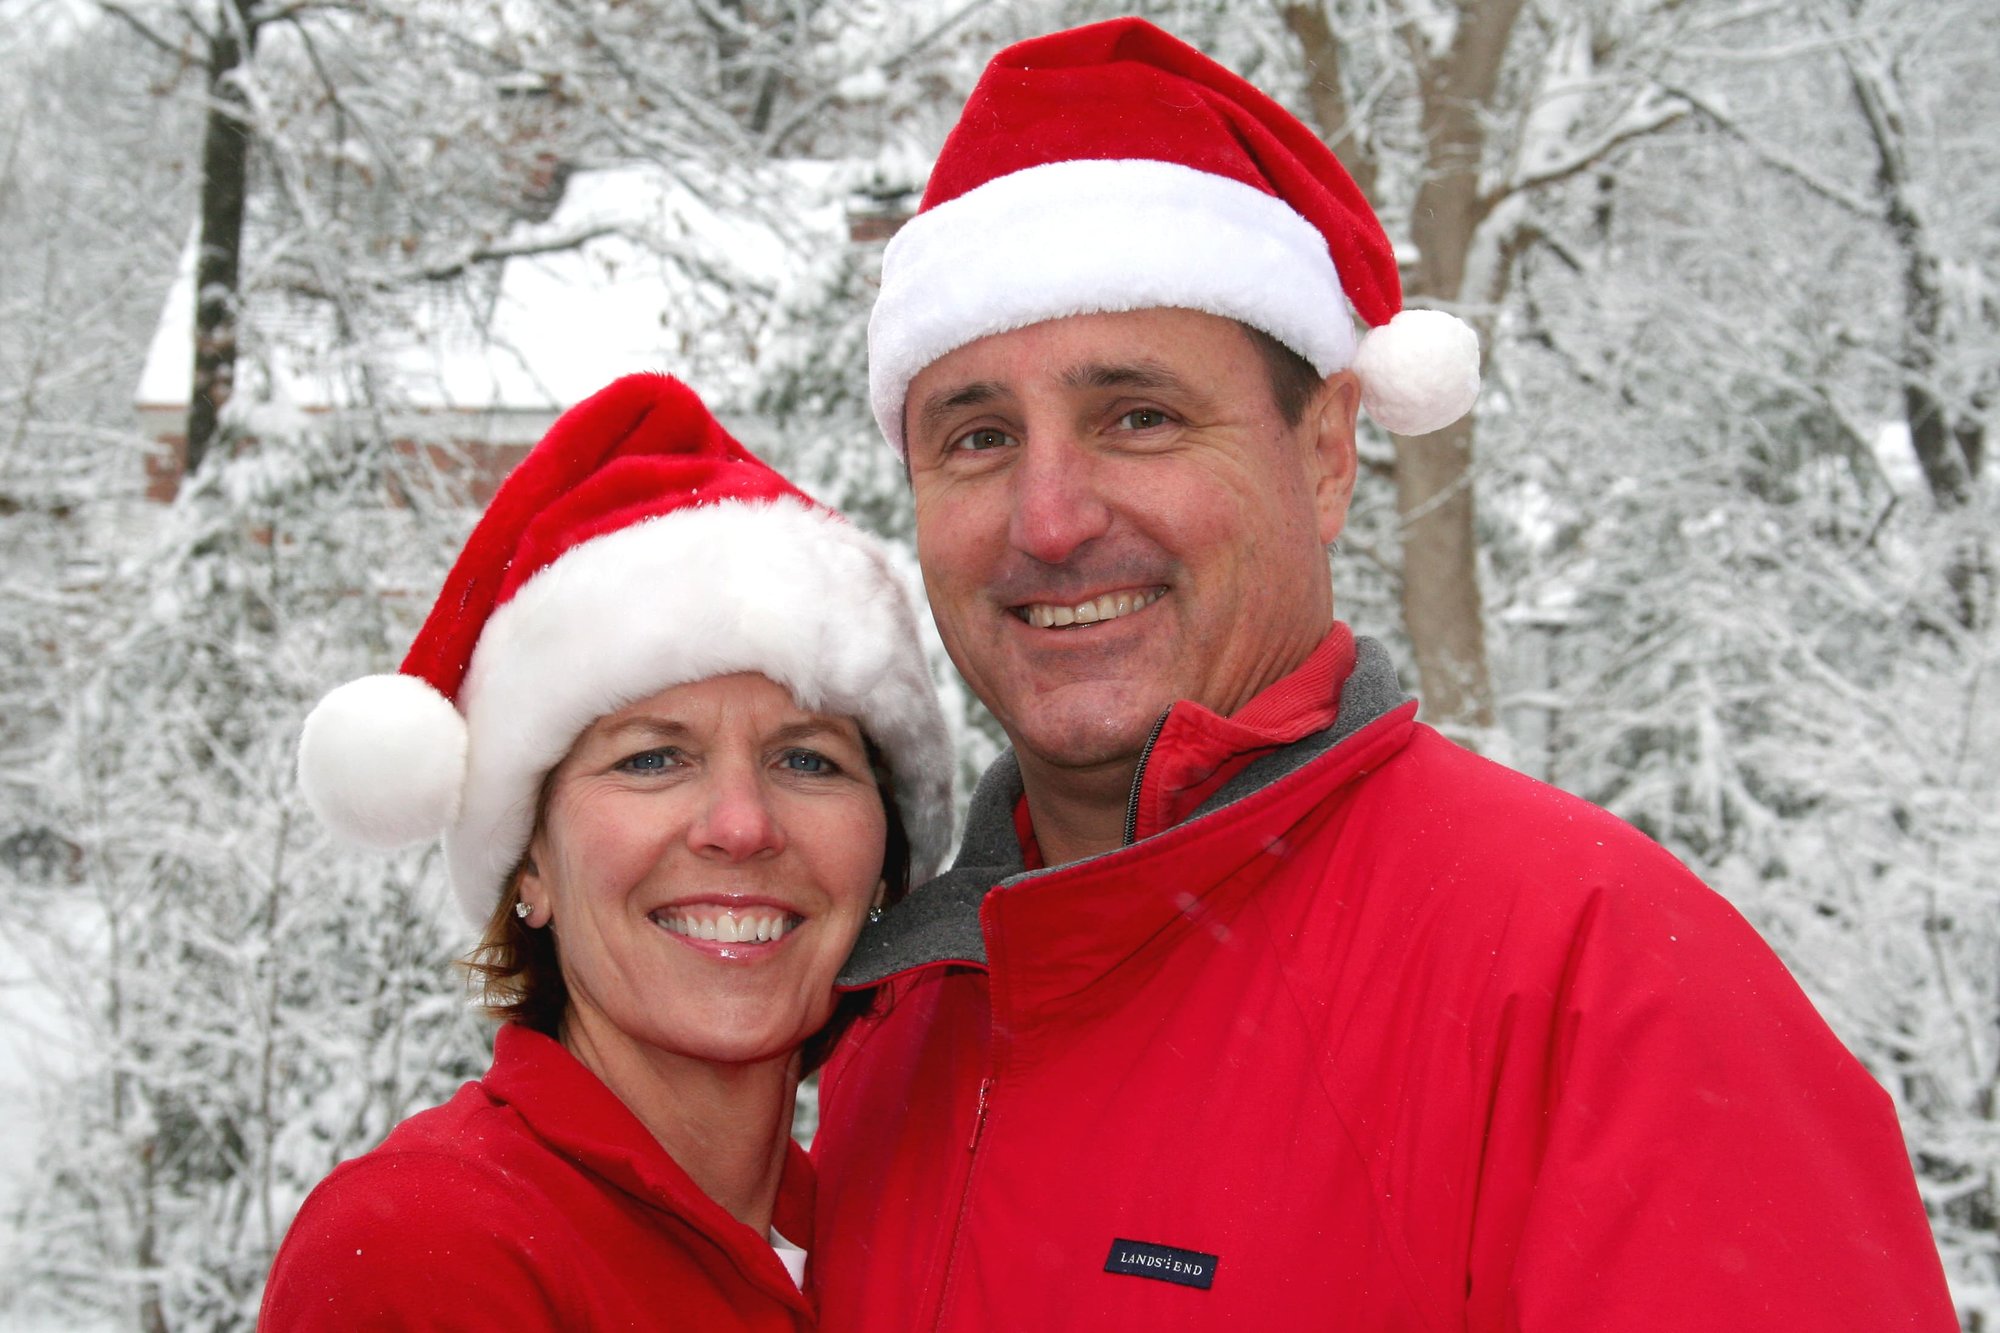 Realtor Kate Wall and Her Husband, Dr Mike Wall, with red Santa hats on in front of a very shite snowy background.